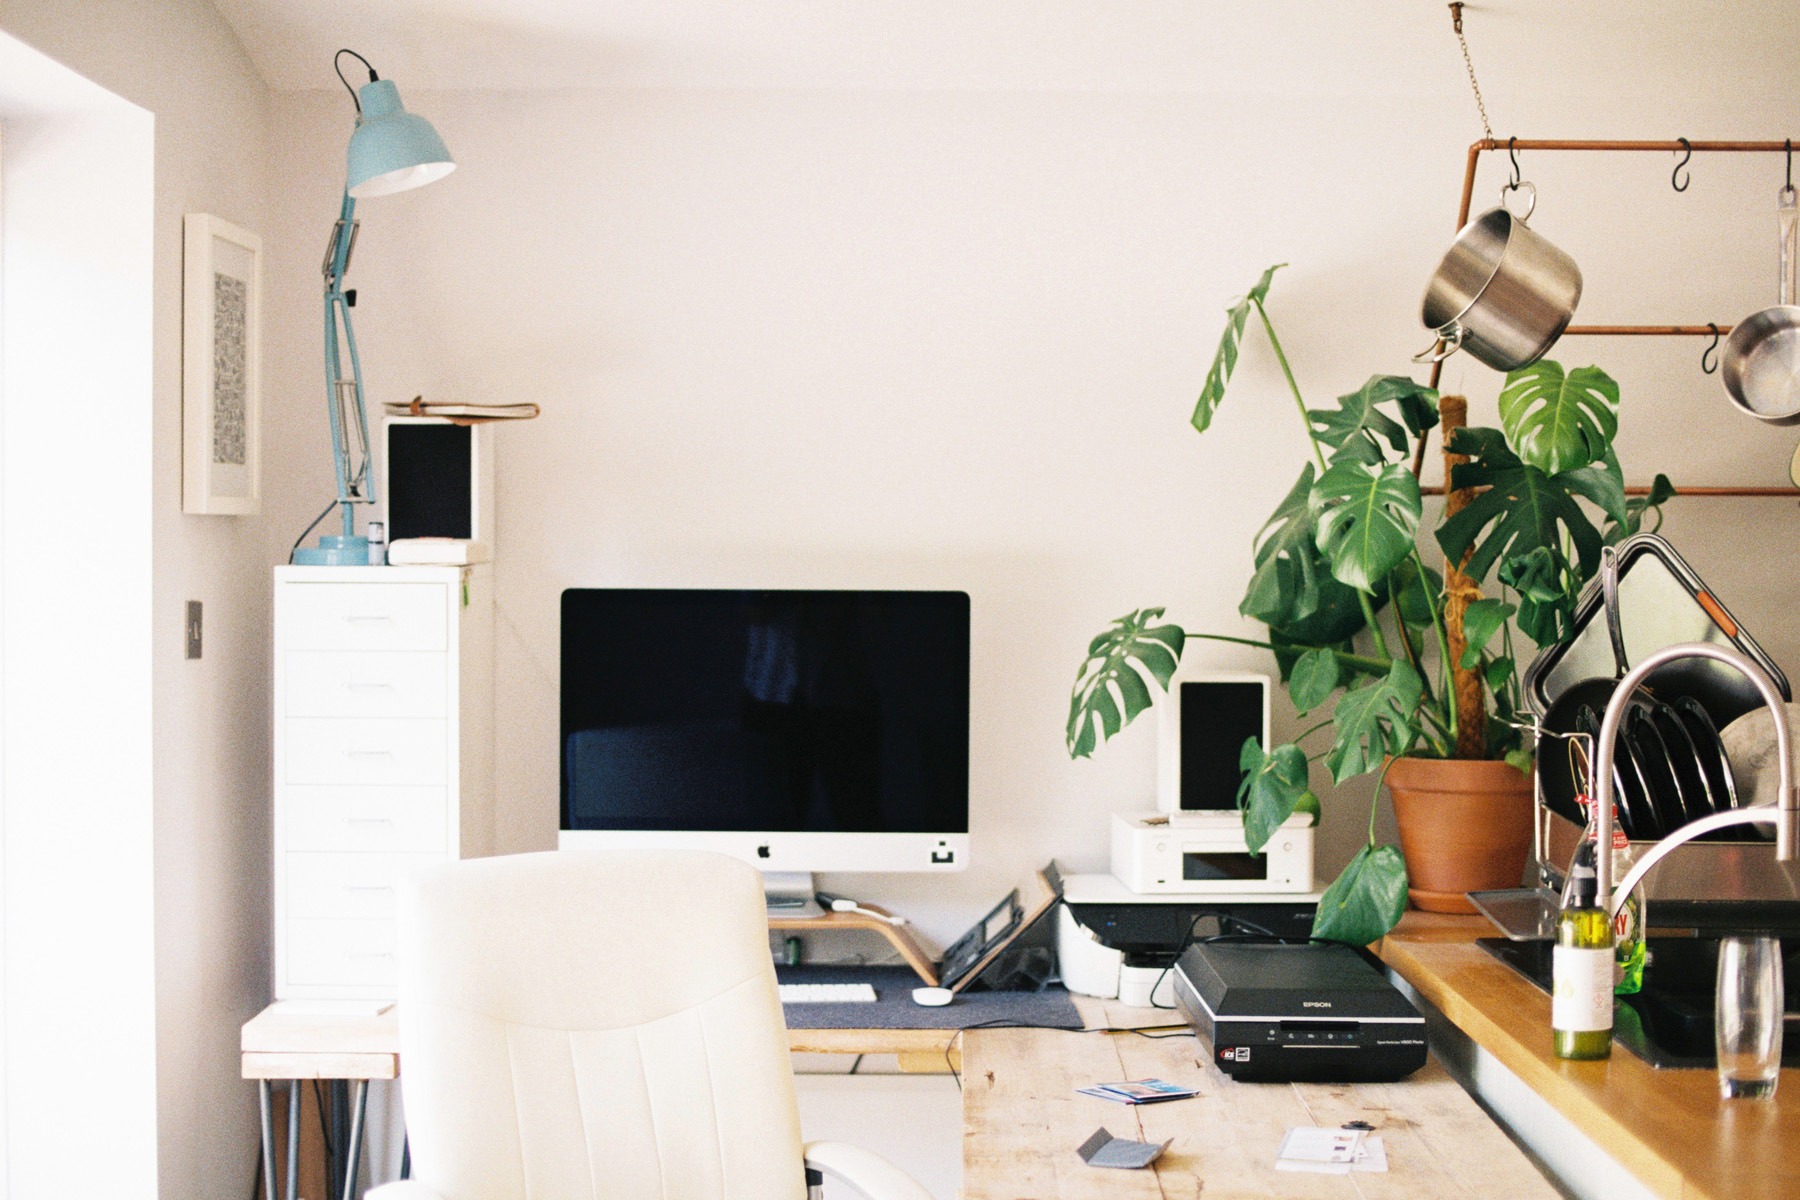 Daily performance reviews and clearing the clutter: 15 tips for those working from home